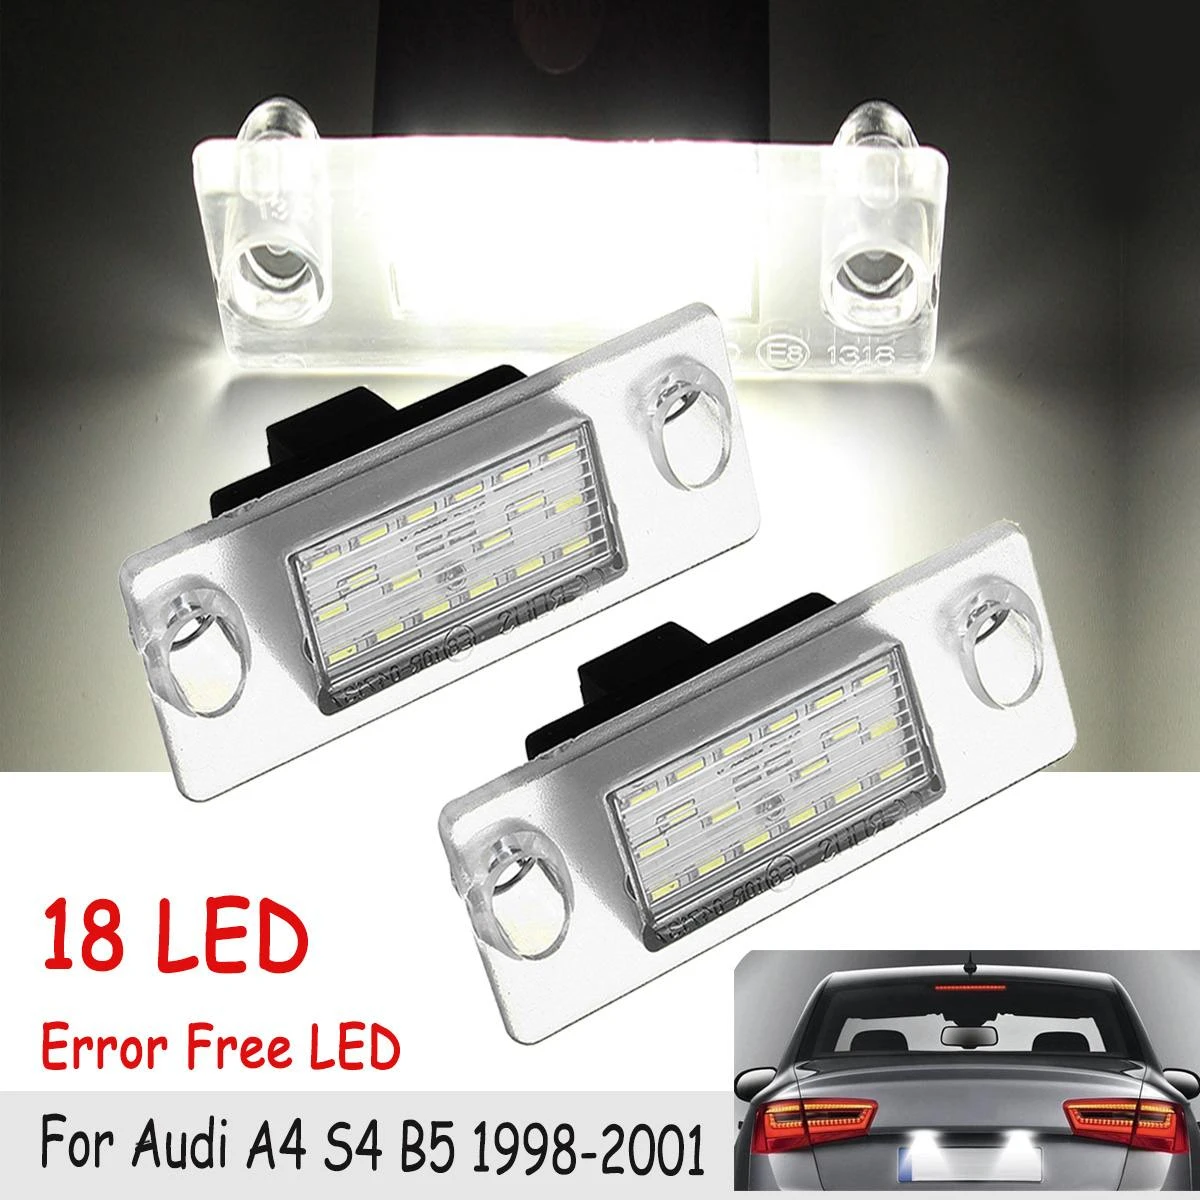 2pcs Error Free LED Number License Plate Light Lamp For Audi A4 S4 B5 S5 B5  A3 S3|Signal Lamp| - AliExpress